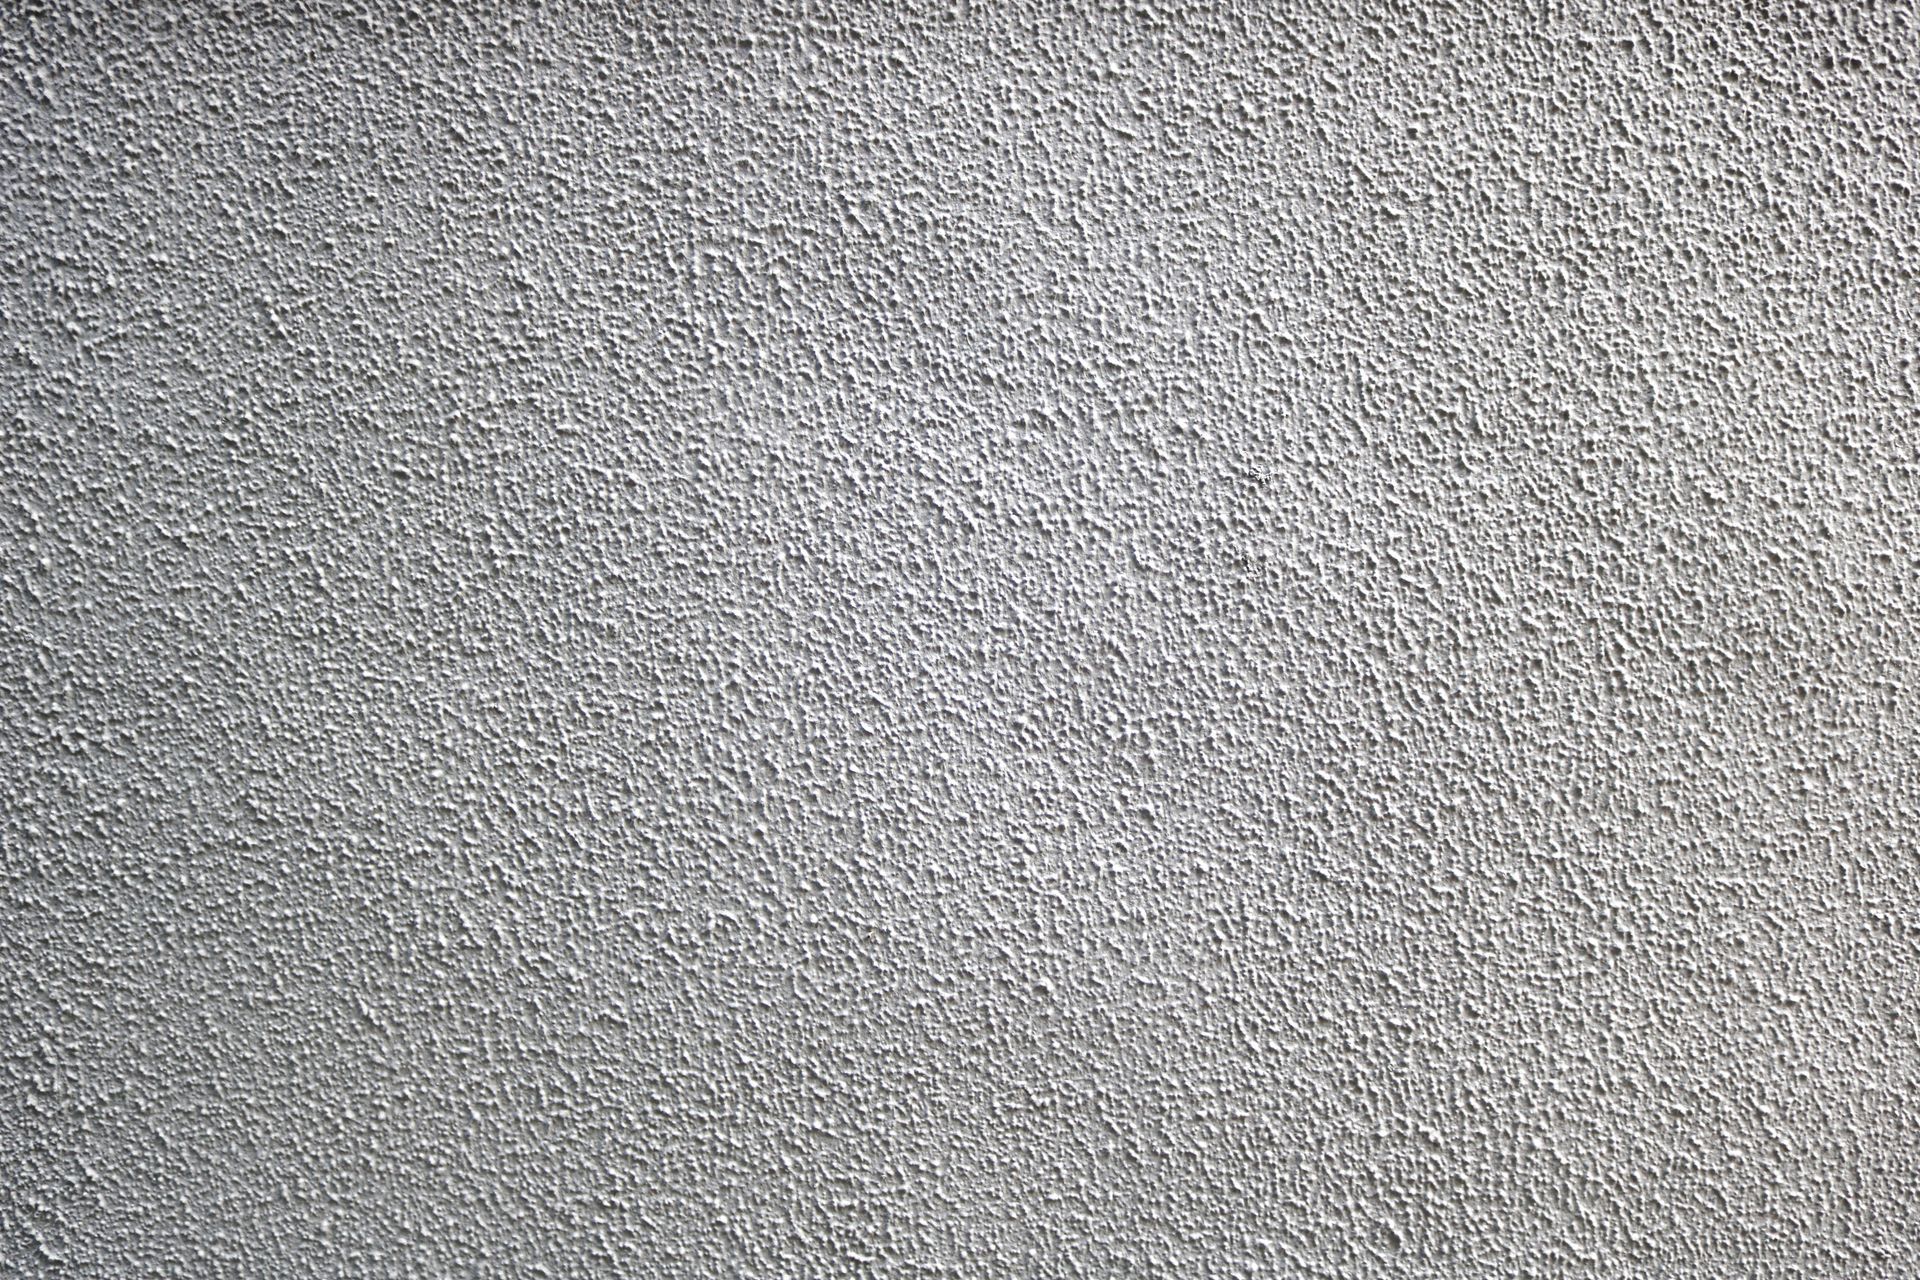 Little popcorn ceiling texture of a blank wall in white color